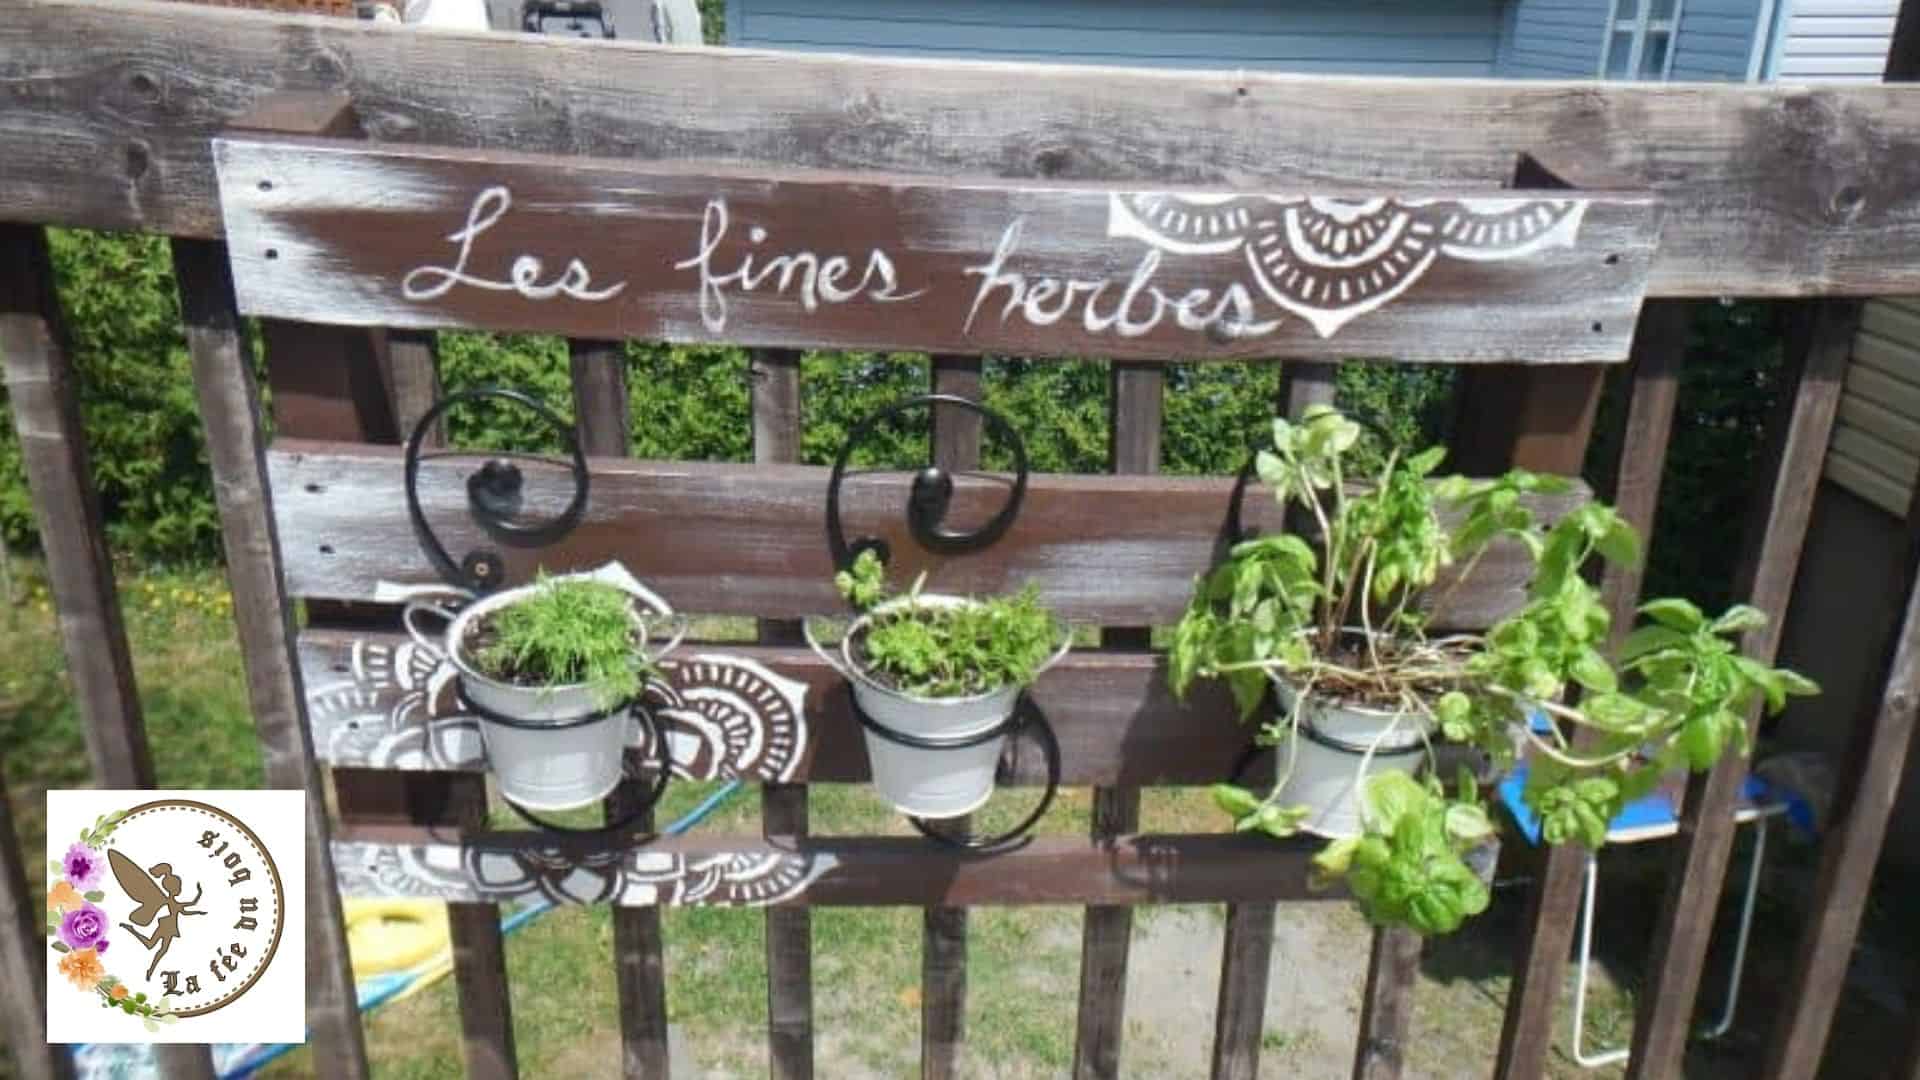 A herb holder, for outdoors